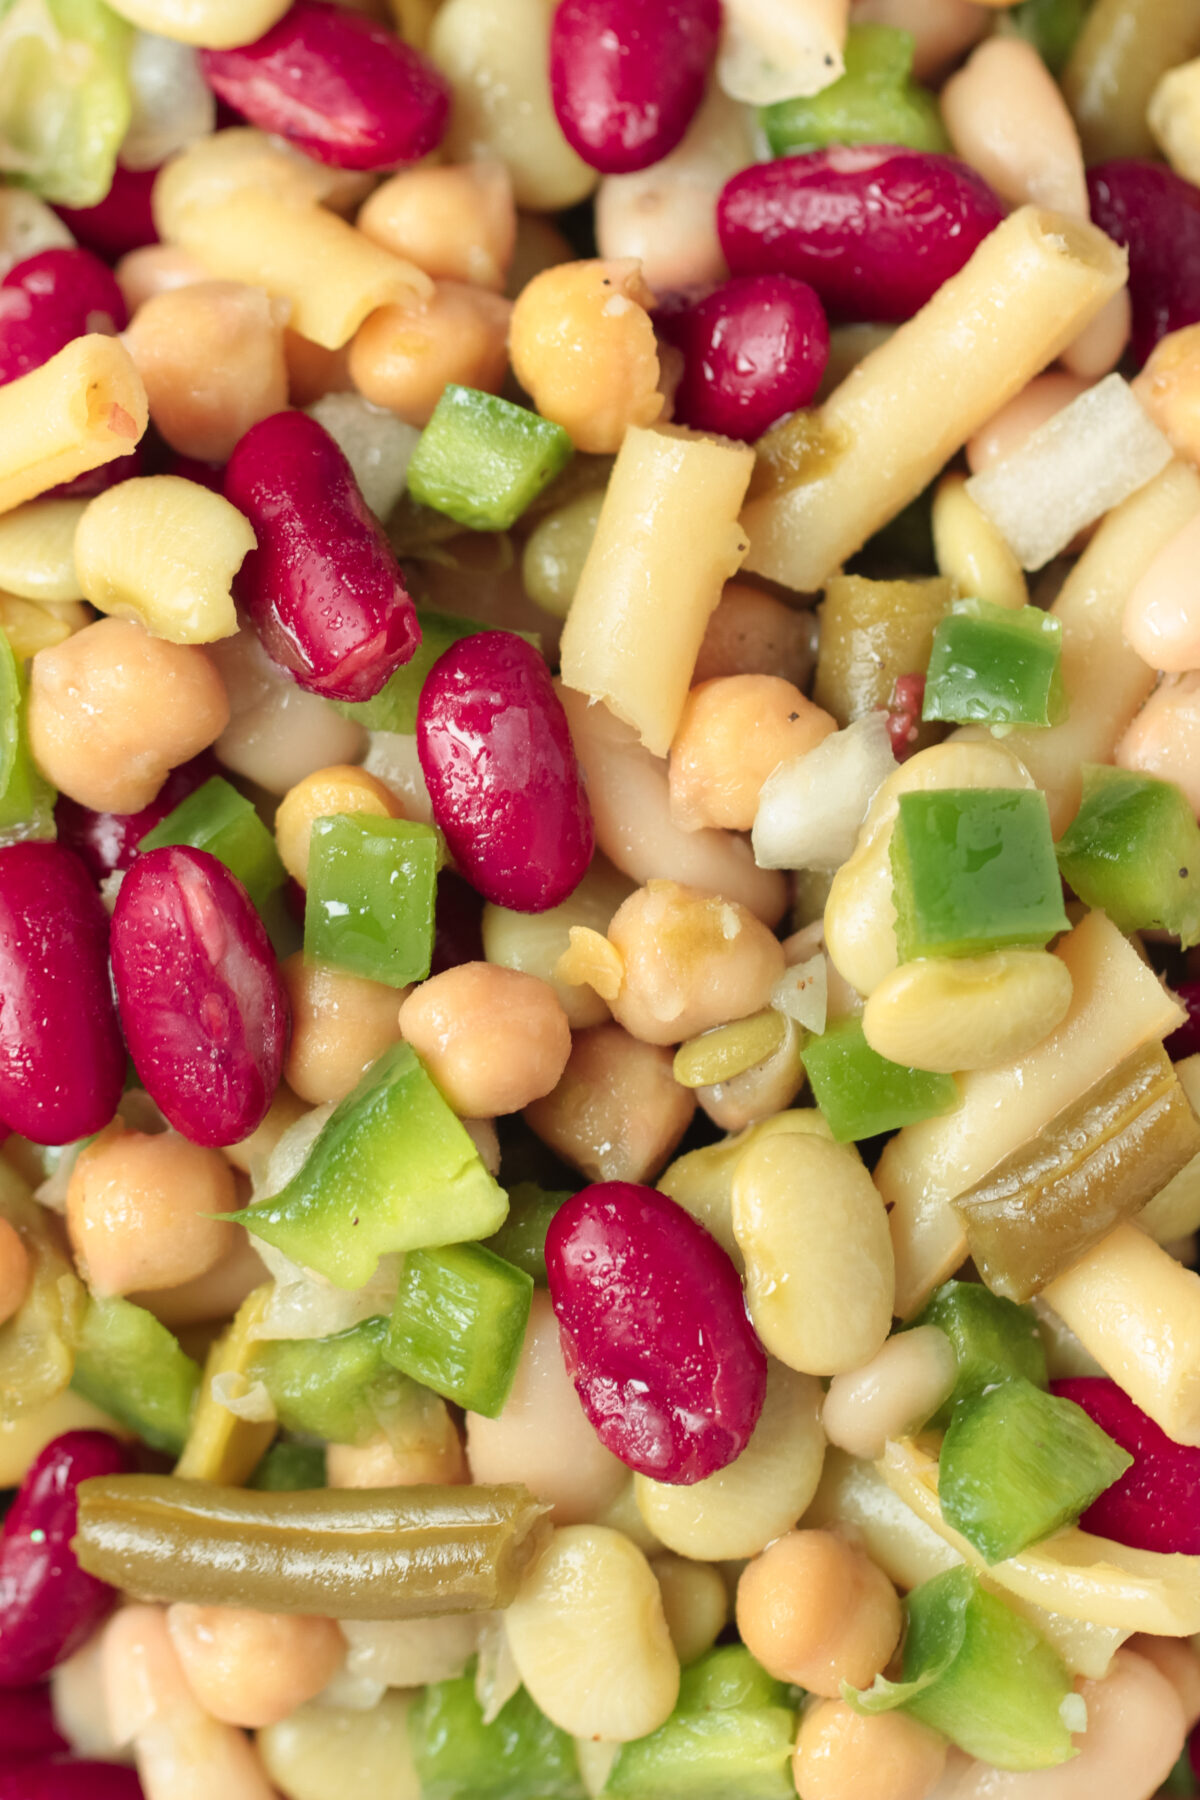 Get the perfect mix of flavor and nutrition with this easy 5 bean salad recipe. Whip up this classic dish in no time for any occasion!